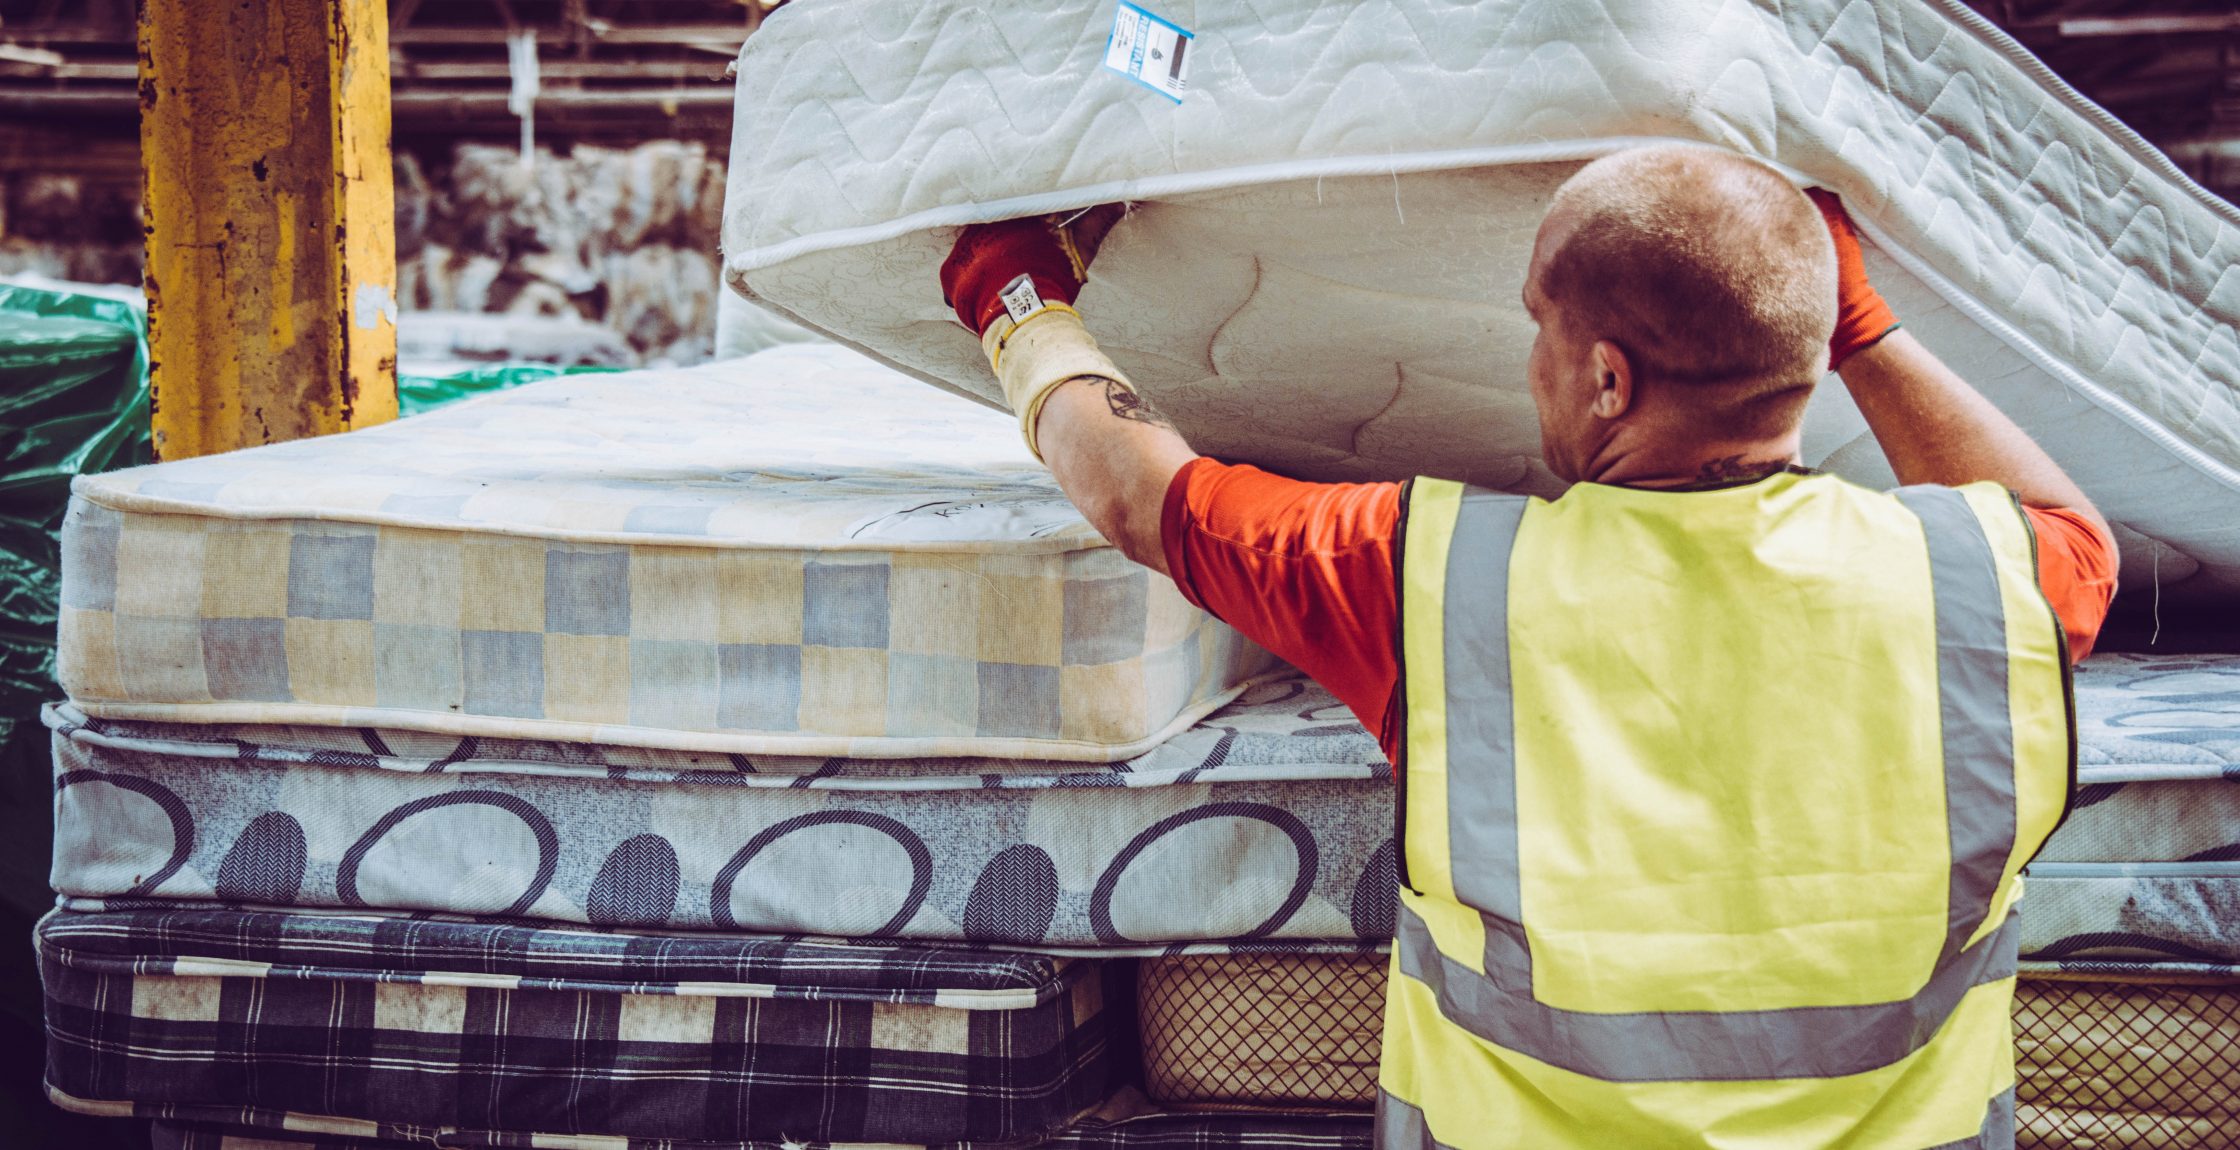 TFR Group partners with SUEZ to handle mattress recycling facility